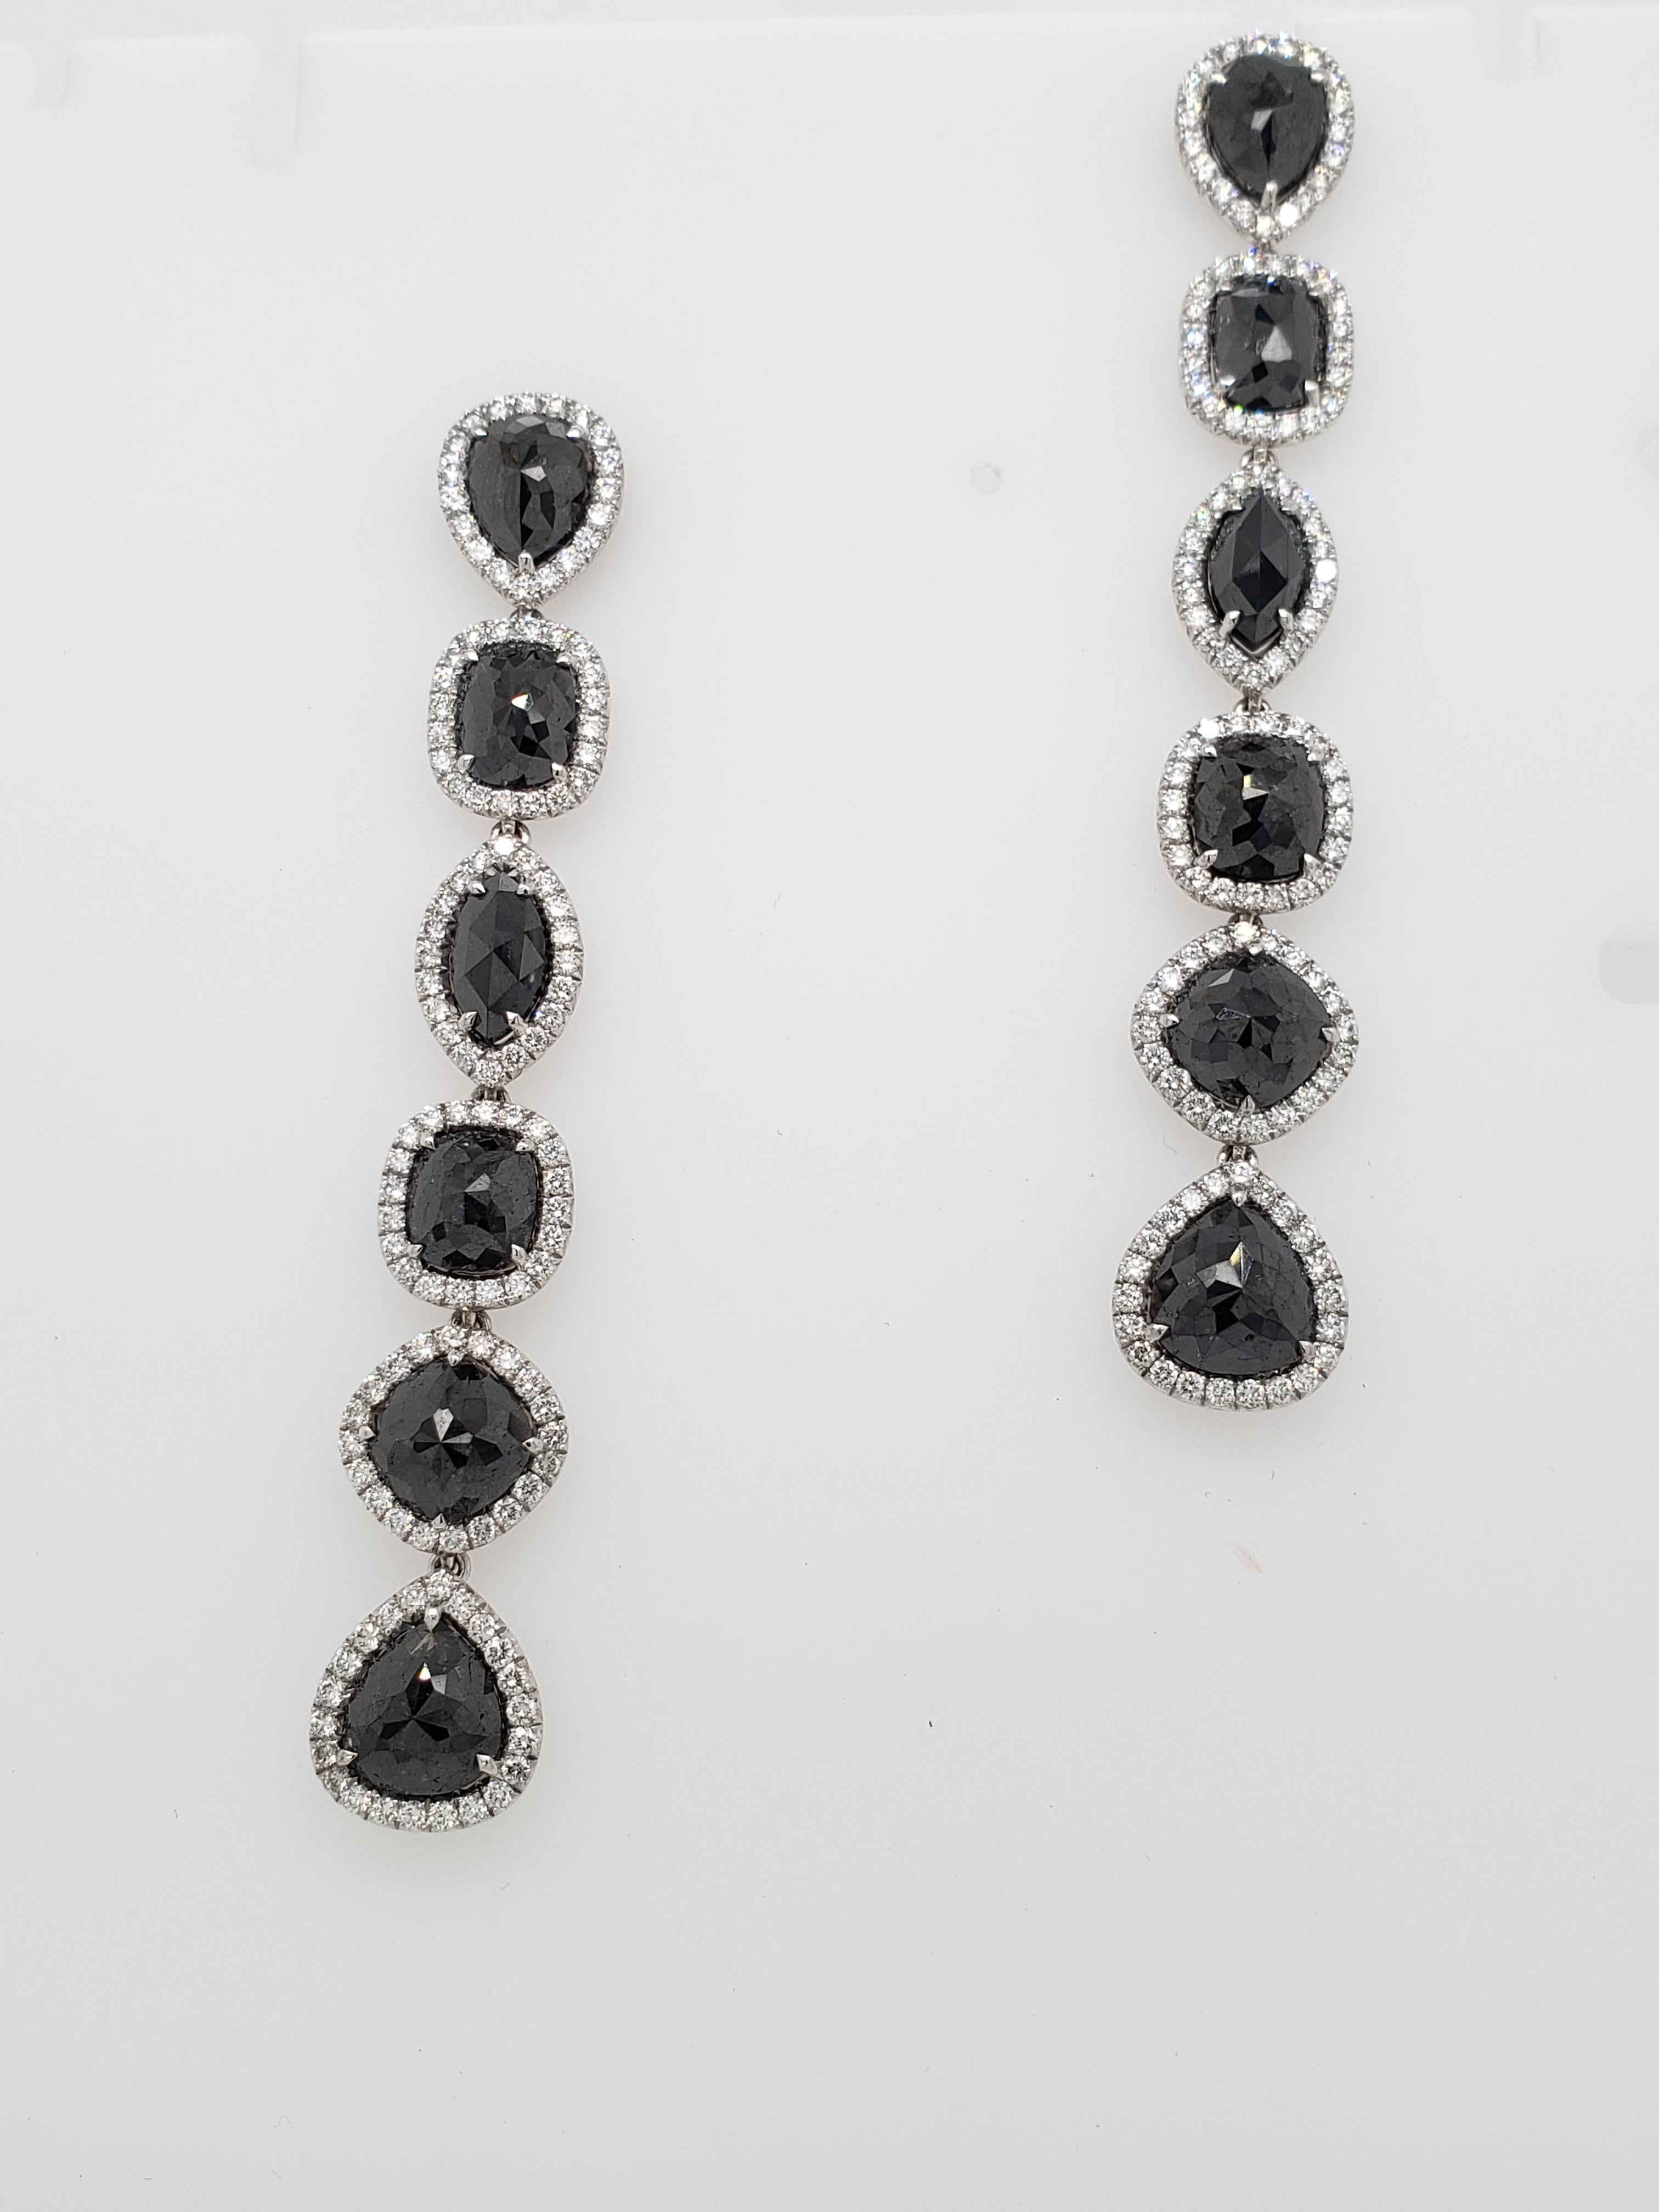 These fathomless Black diamond drop earrings feature 12 Rose cut Black diamonds in various shapes totaling 18.66 carats, edged in collection White pavé diamonds weighing 2.98 carats. Hand-crafted in 18K White Gold.
Clean & Chic; Fall into the abyss